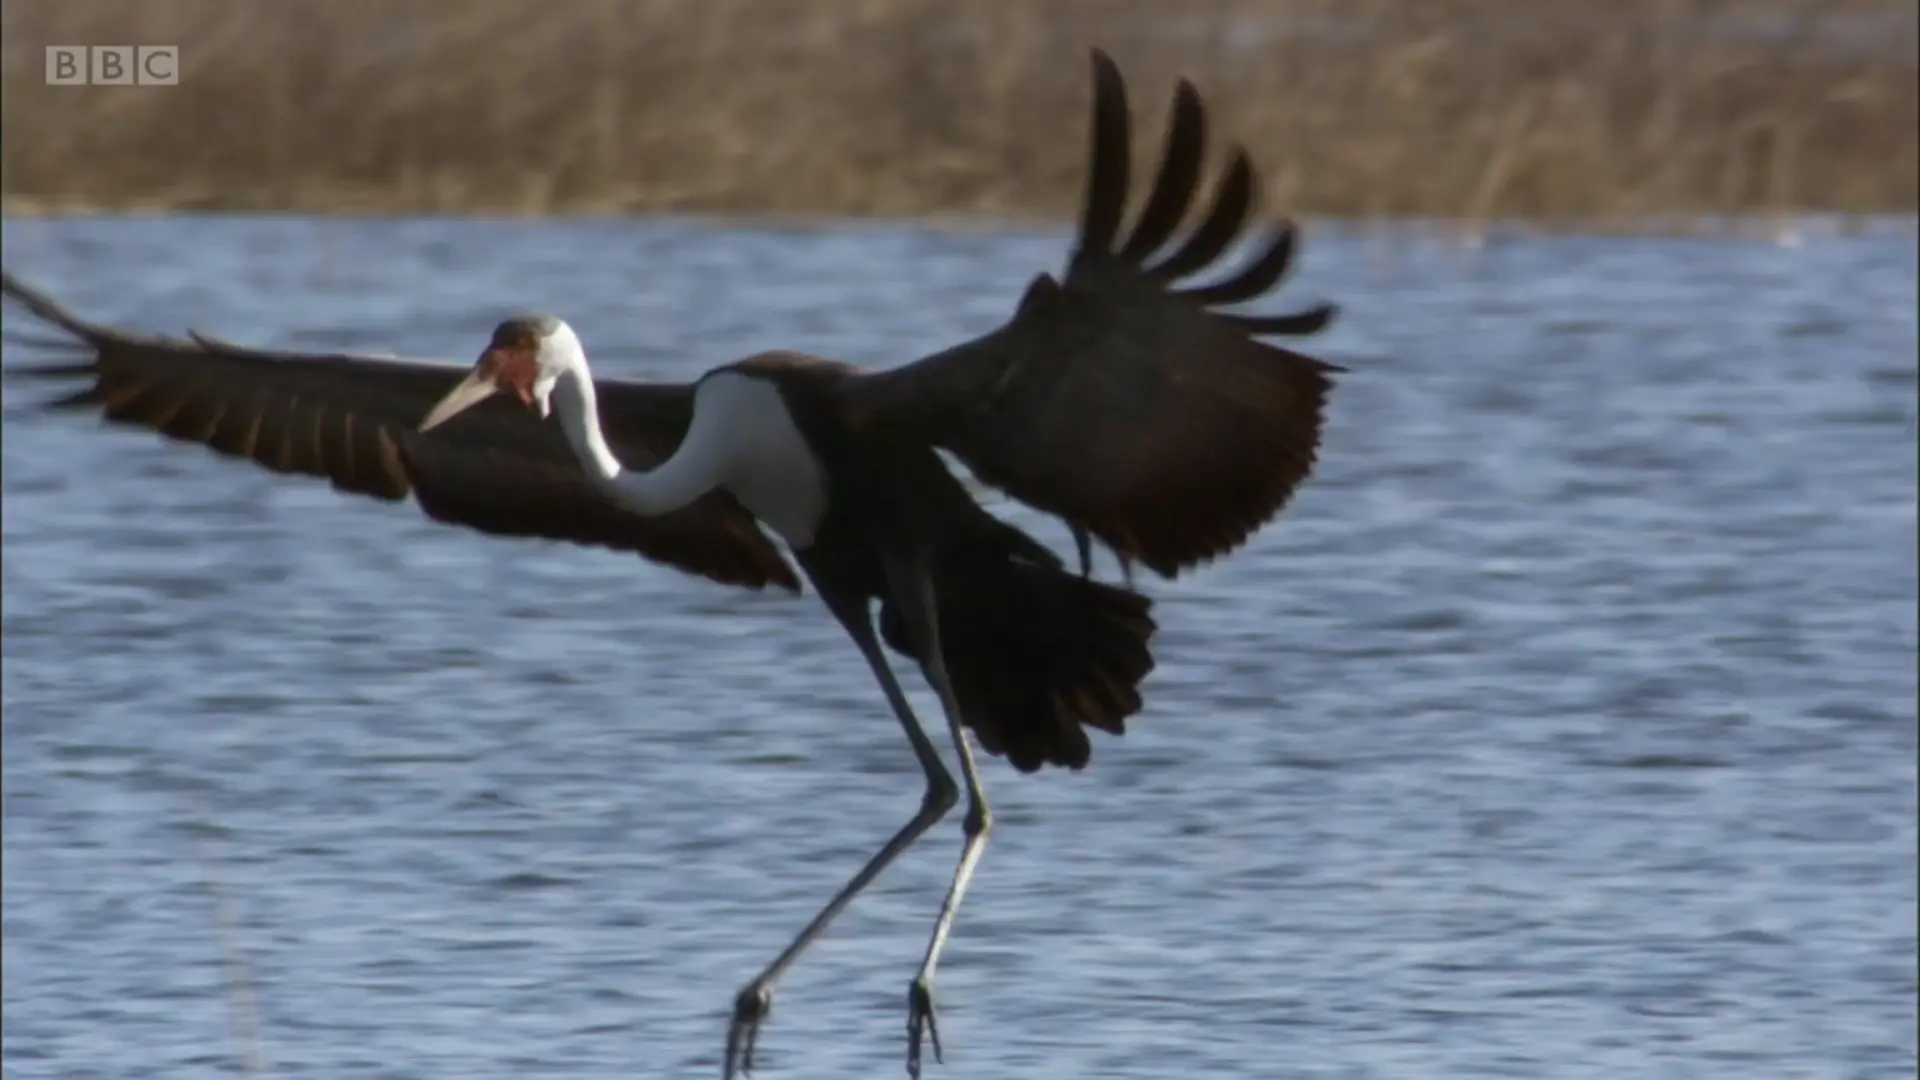 Wattled crane (Grus carunculata) as shown in Planet Earth - From Pole to Pole